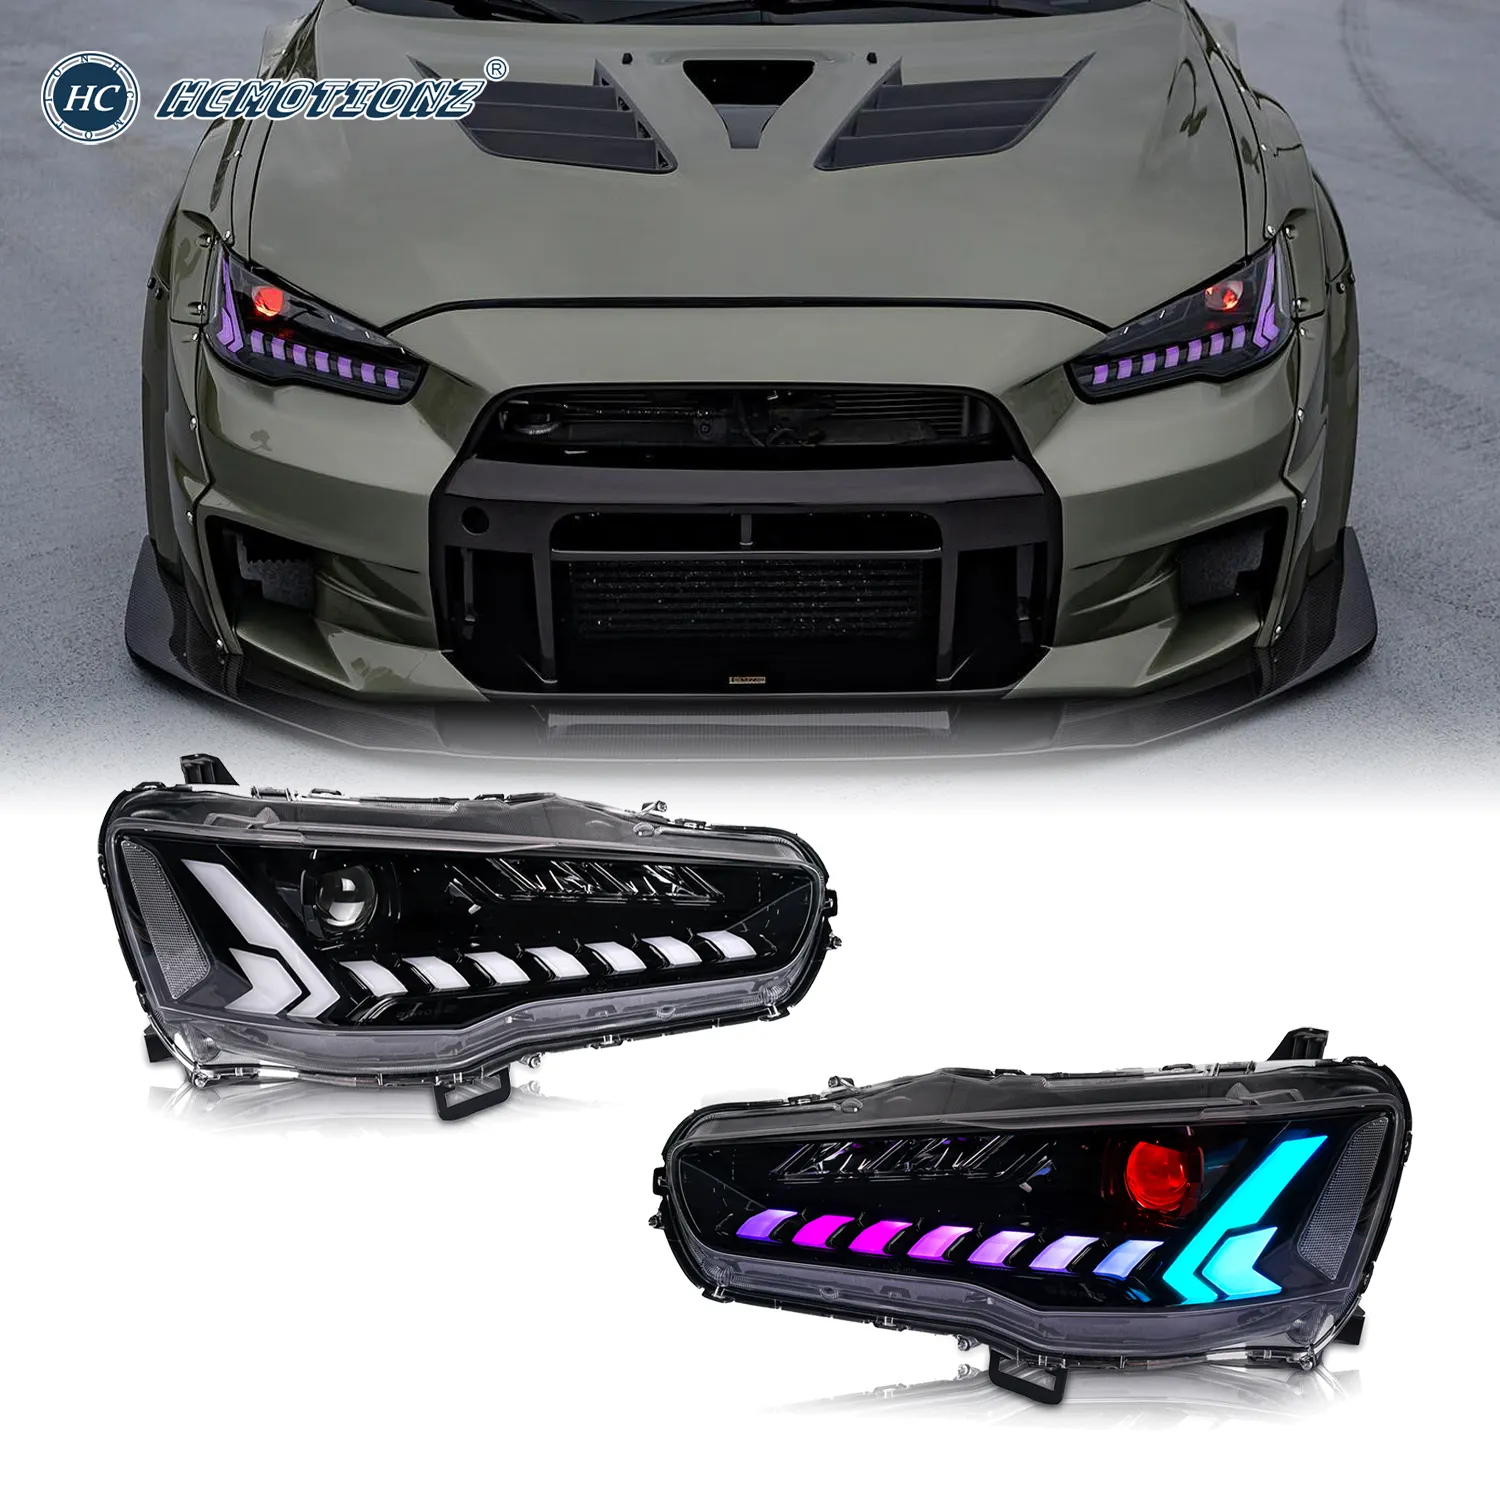 HCMOTIONZ RGB Start UP Animation DRL Front Lamps Assembly ex evo CF/CJ 2008-2017 Headlights For Mitsubishi Lancer